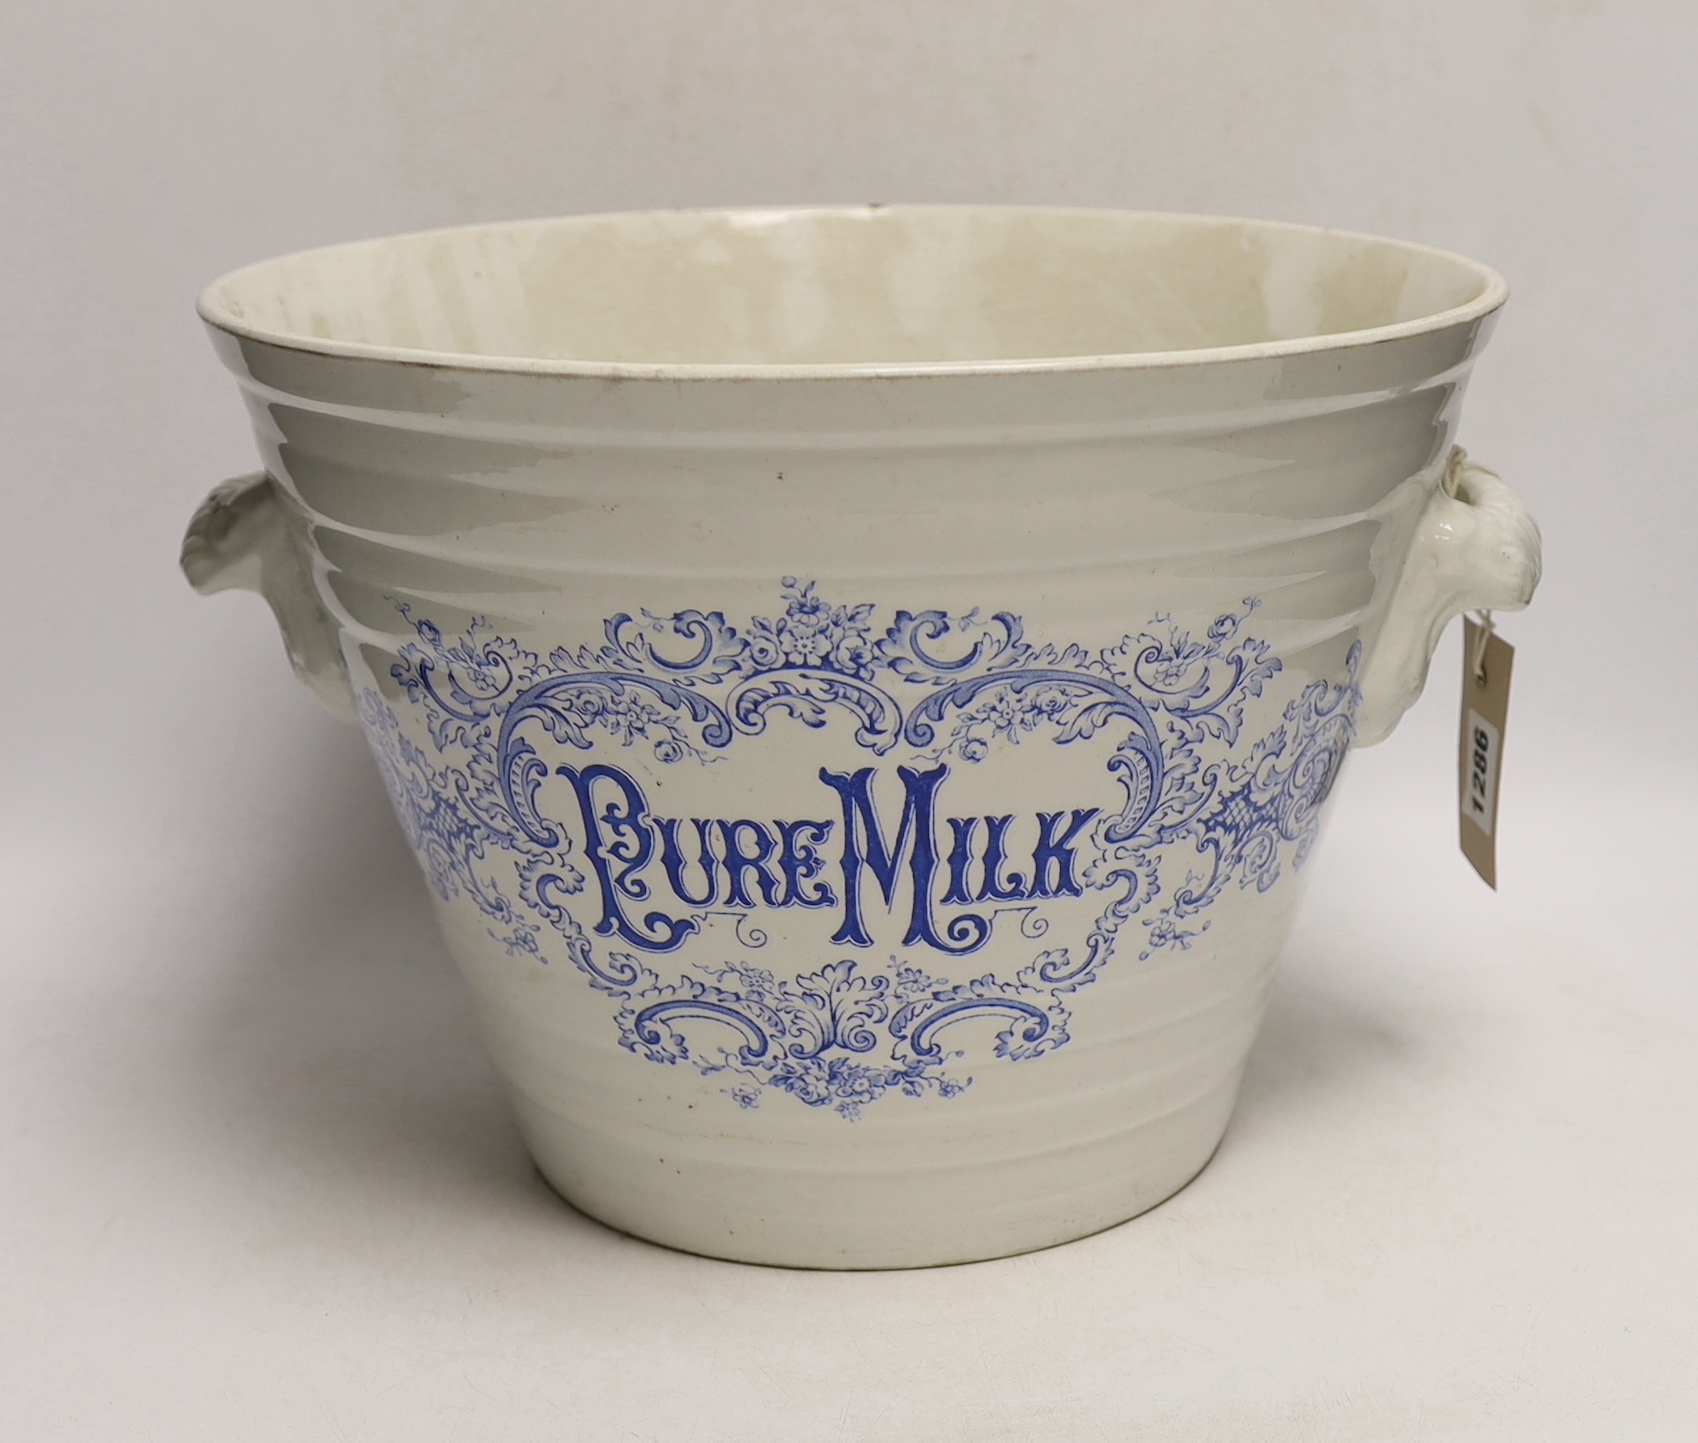 An Edwardian Dairy Outfit Co ironstone advertising Pure Milk pail, diameter 32.5cm